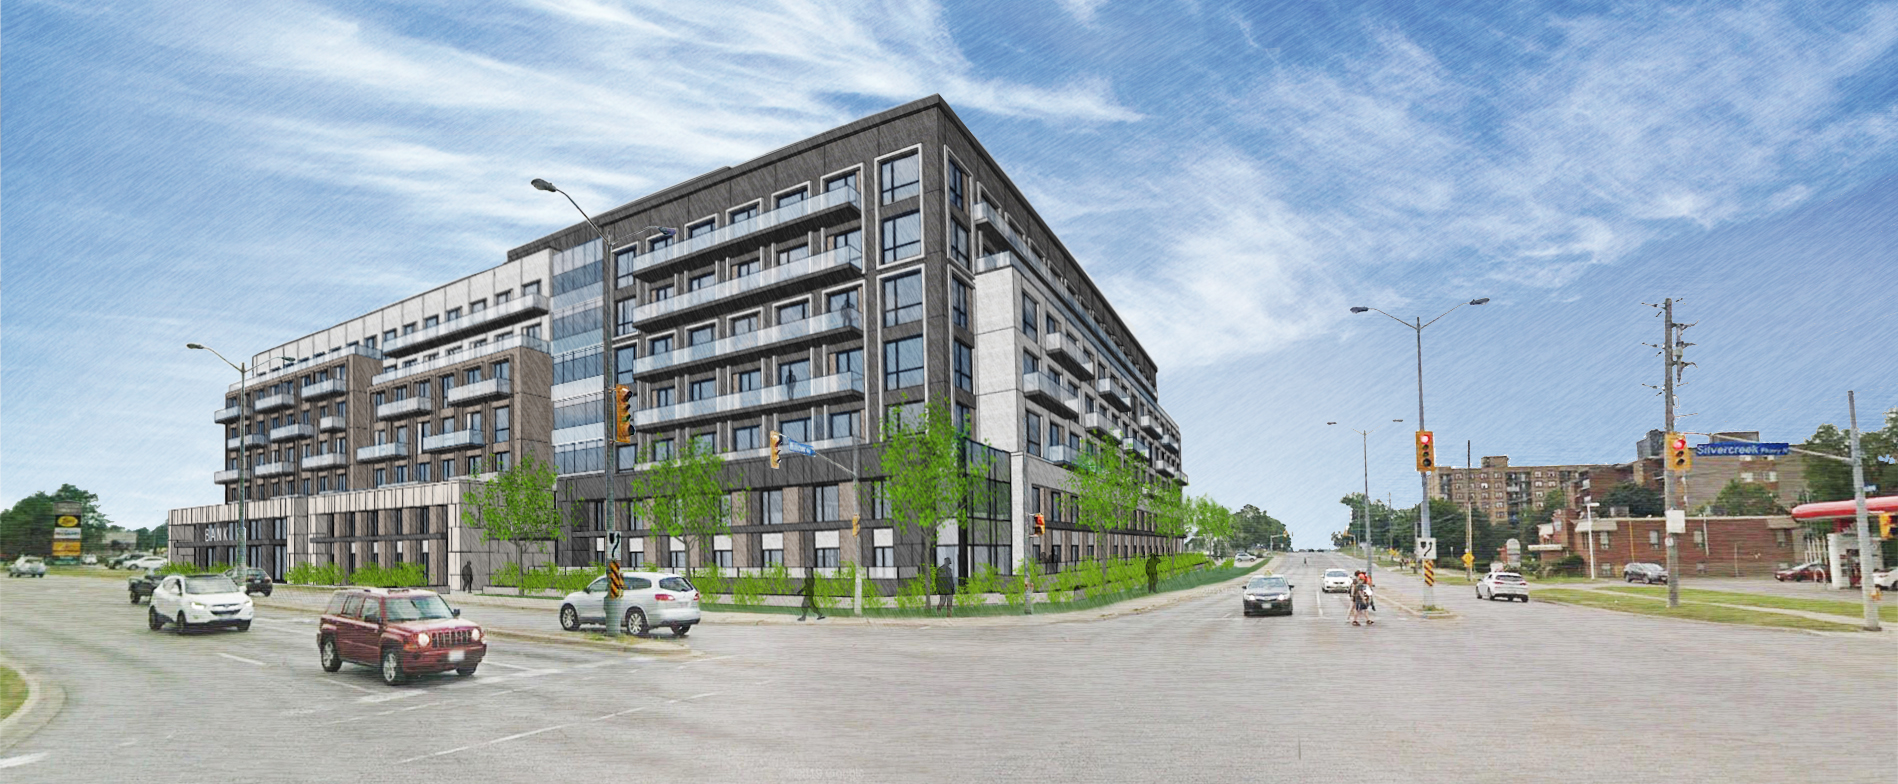 Updated rendering shows a six storey mixed use apartment building on the Willow West Mall property at the northeast corner of Silvercreek Parkway North and Willow Road. Commercial uses are on the ground level. The new building is various shades of grey with windows and balconies on both frontages. Vehicles, trees and pedestrians are shown on the roadways for perspective